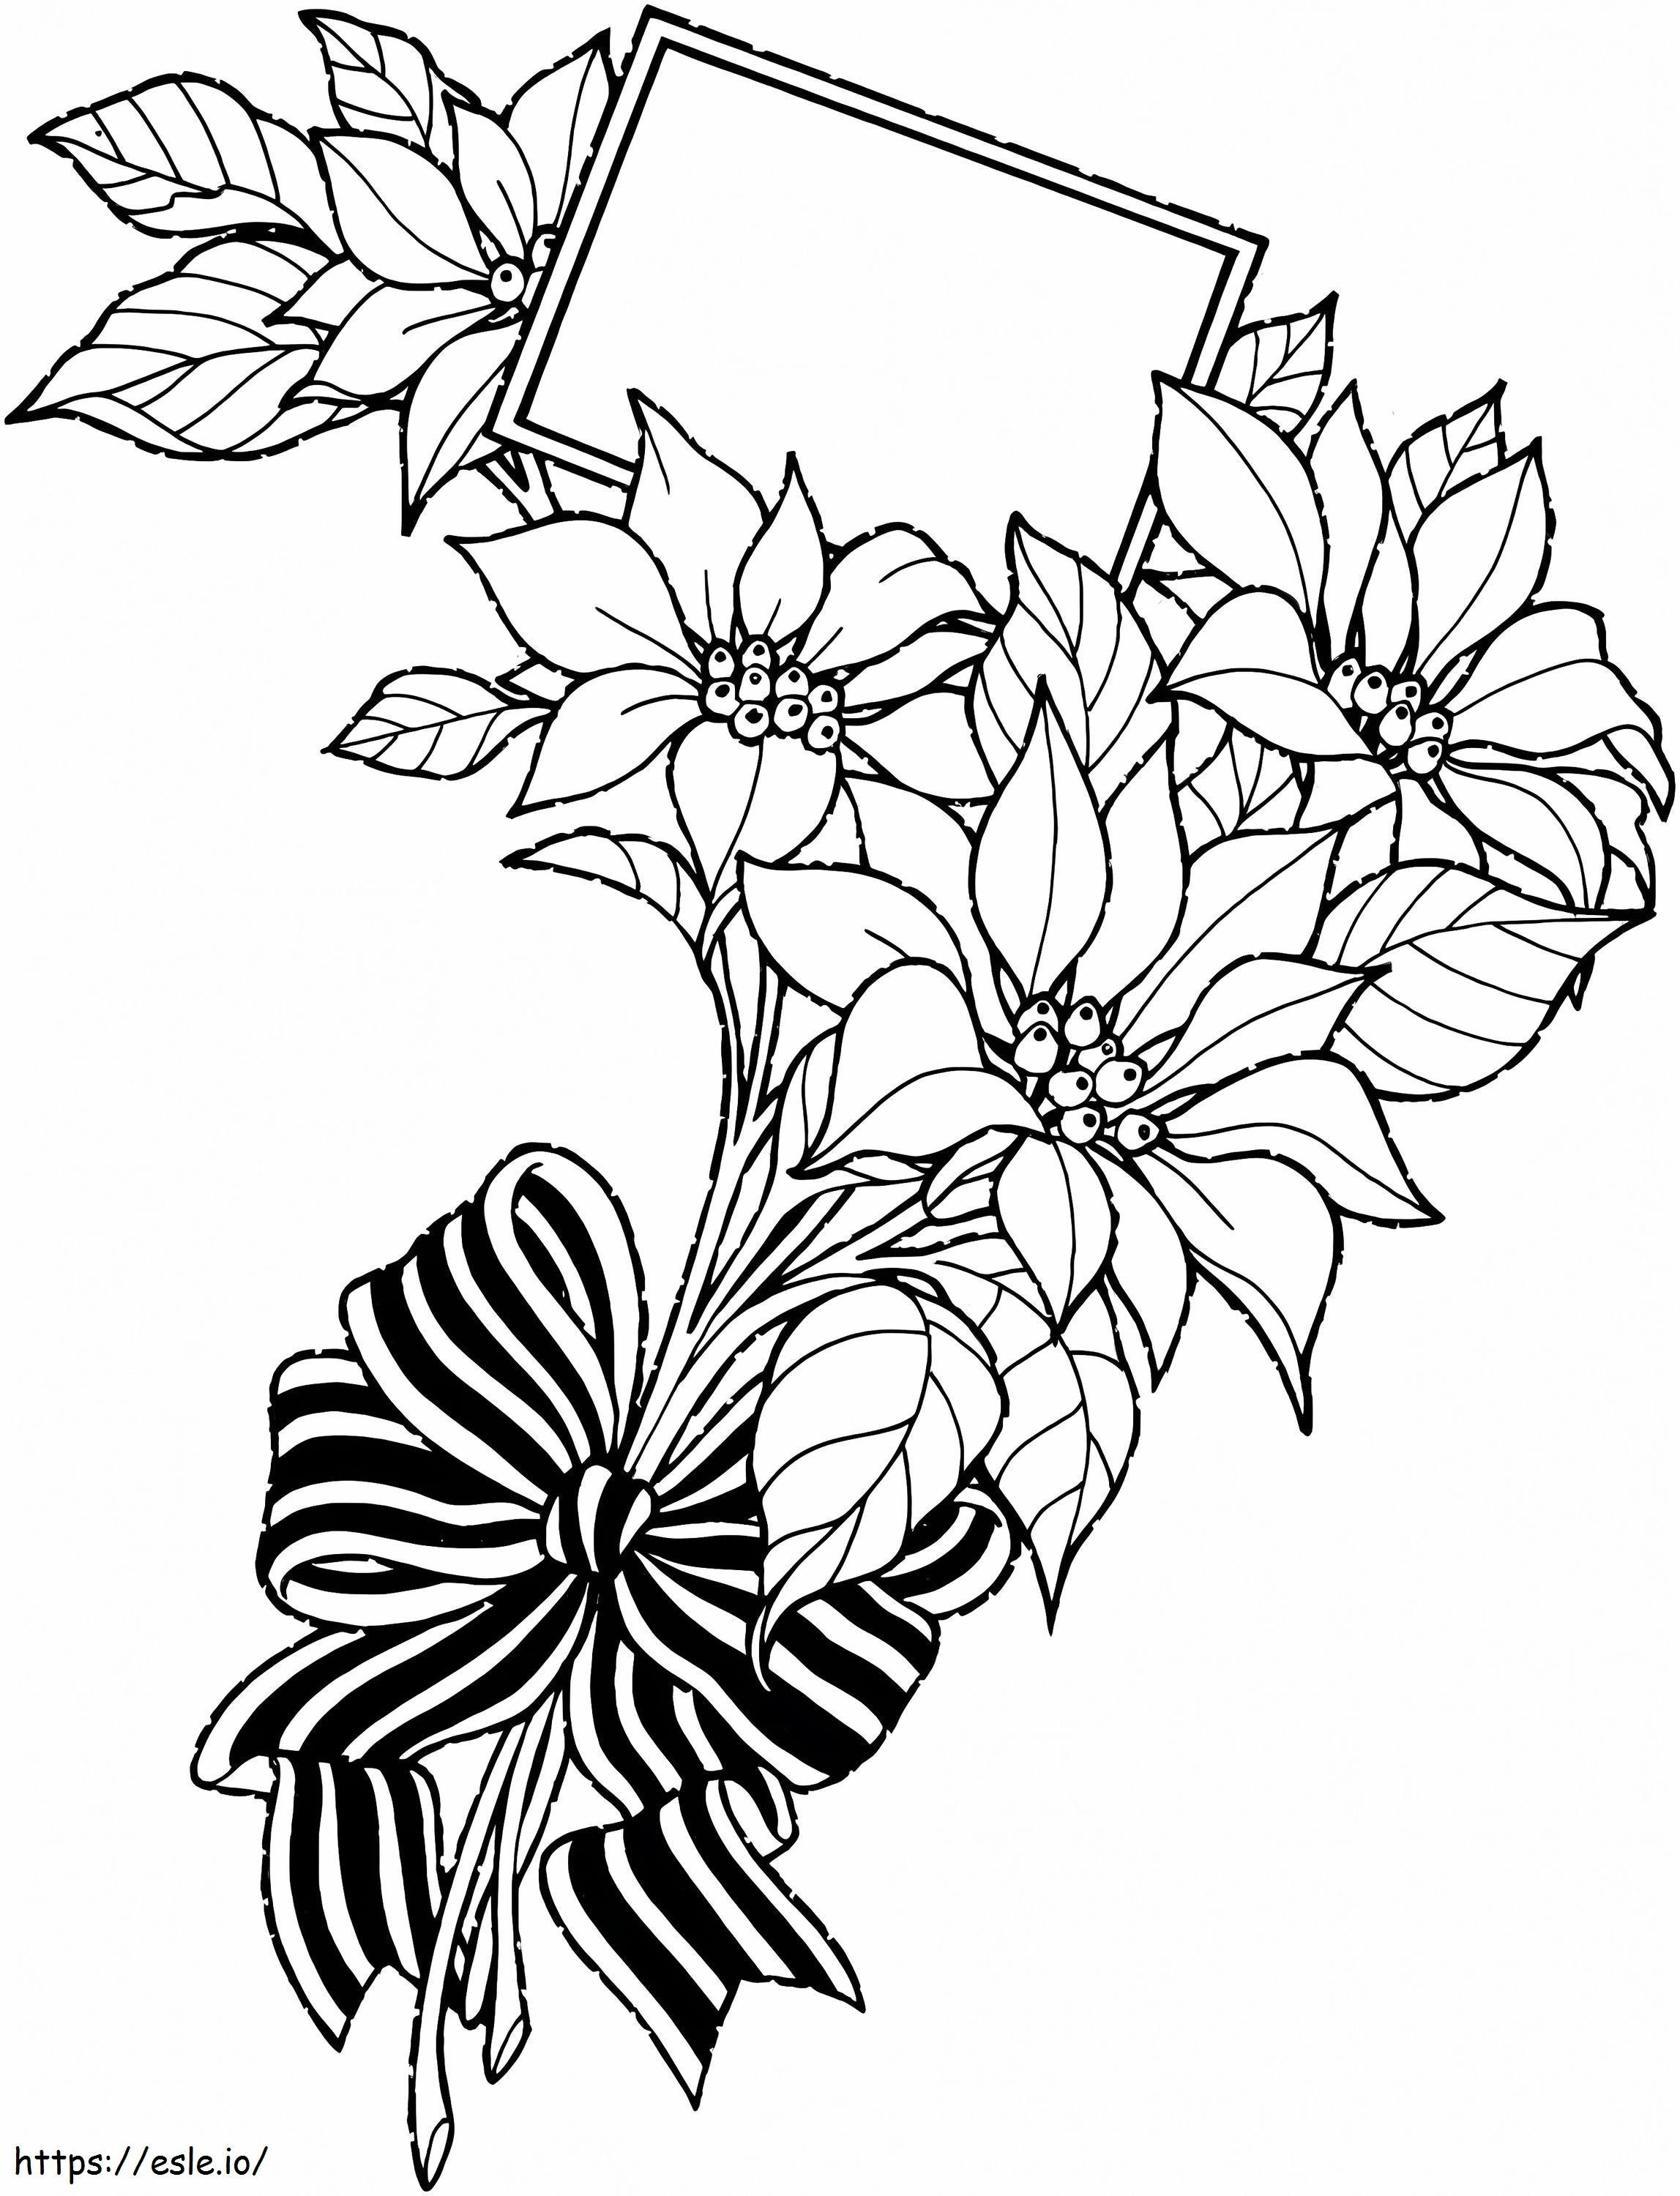 Christmas Poinsettia Bouquet coloring page